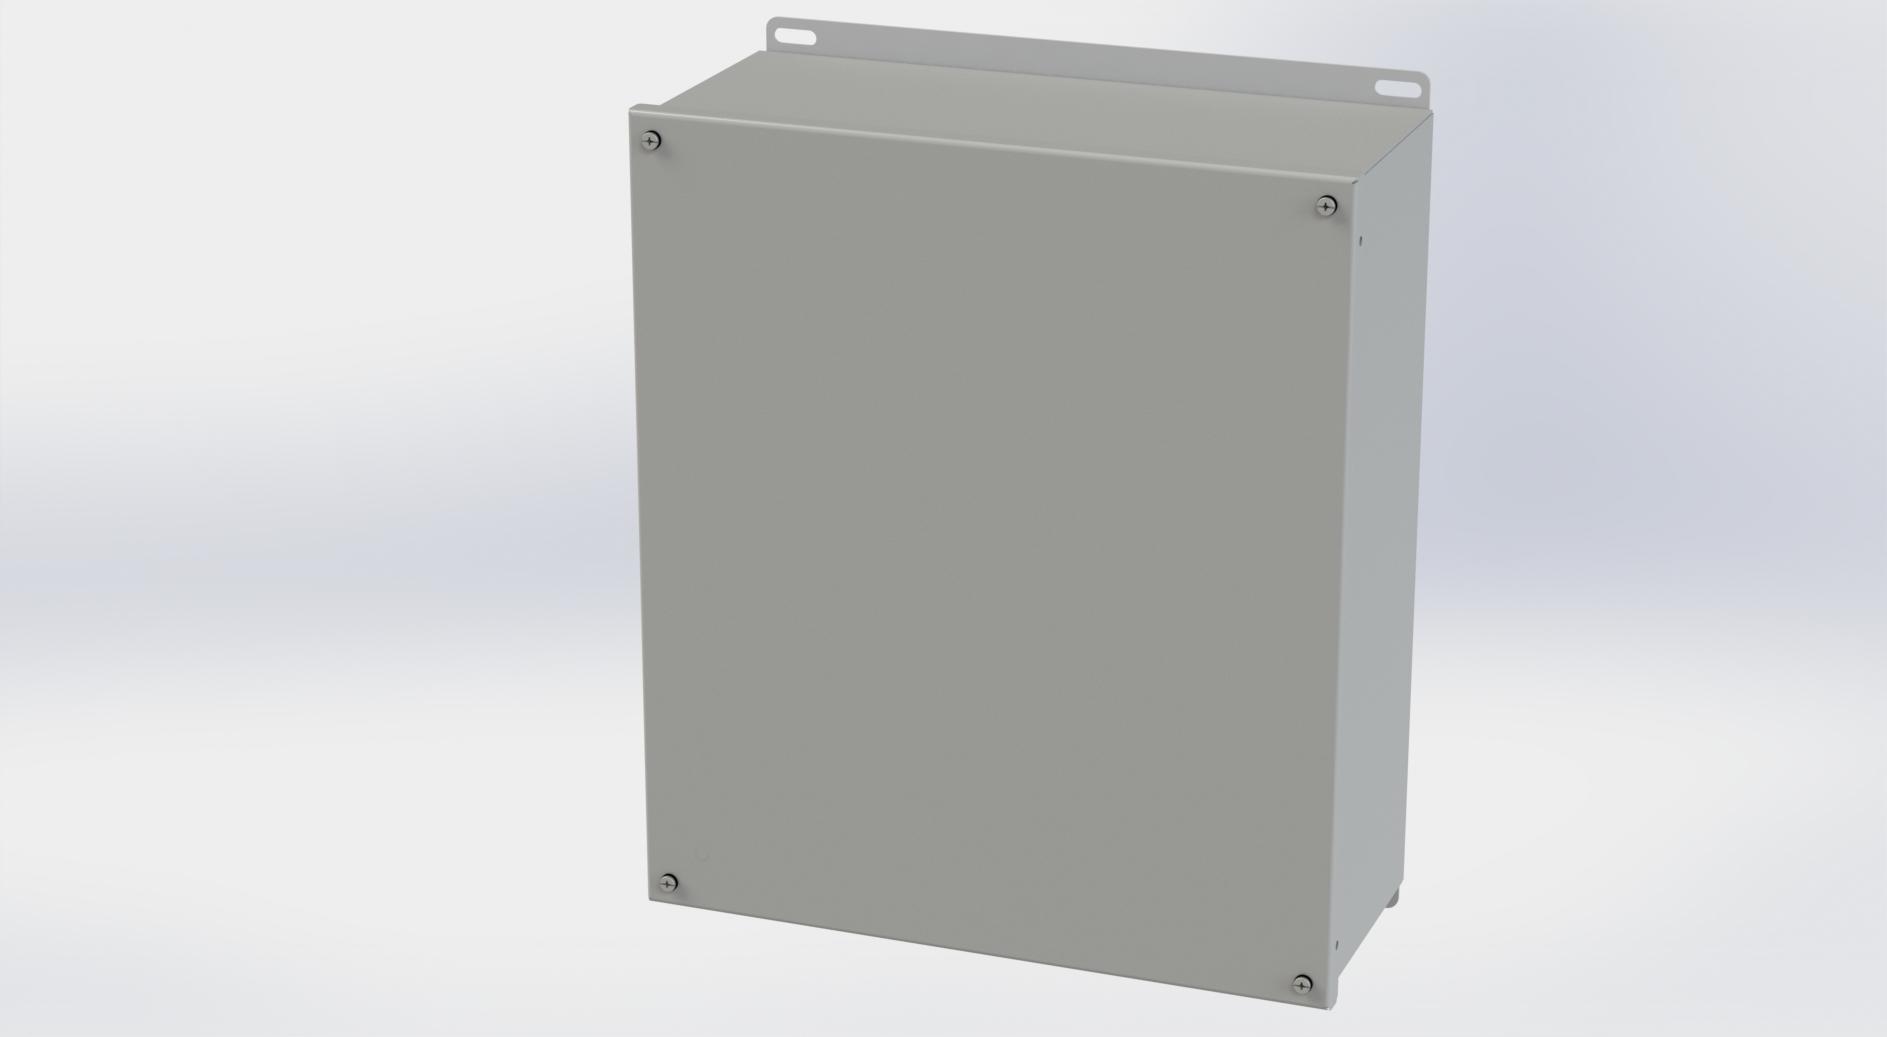 Saginaw Control SCE-1614SC SC Enclosure, Height:16.13", Width:14.00", Depth:6.00", ANSI-61 gray powder coating inside and out.  Optional sub-panels are powder coated white.